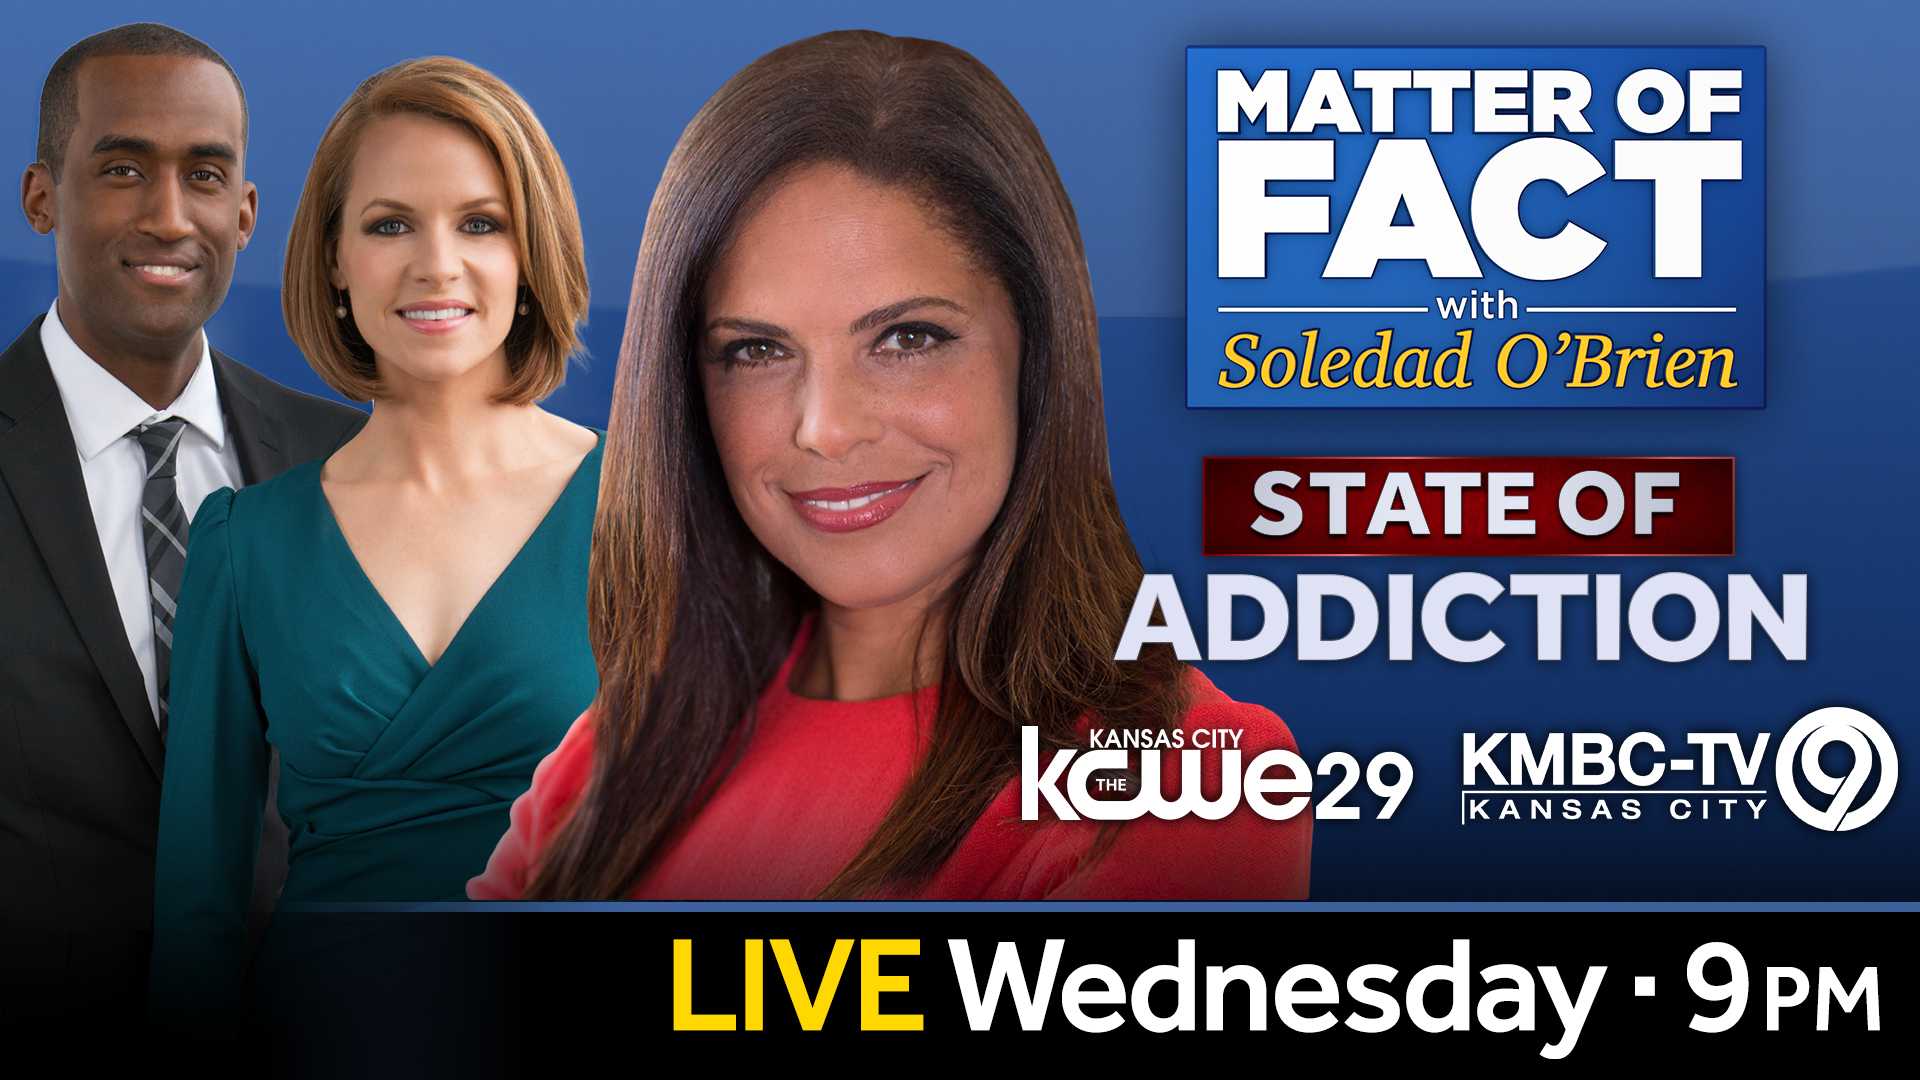 Matter of Fact: State of Addiction to discuss nation's opioid crisis tonight on KMBC and KCWE